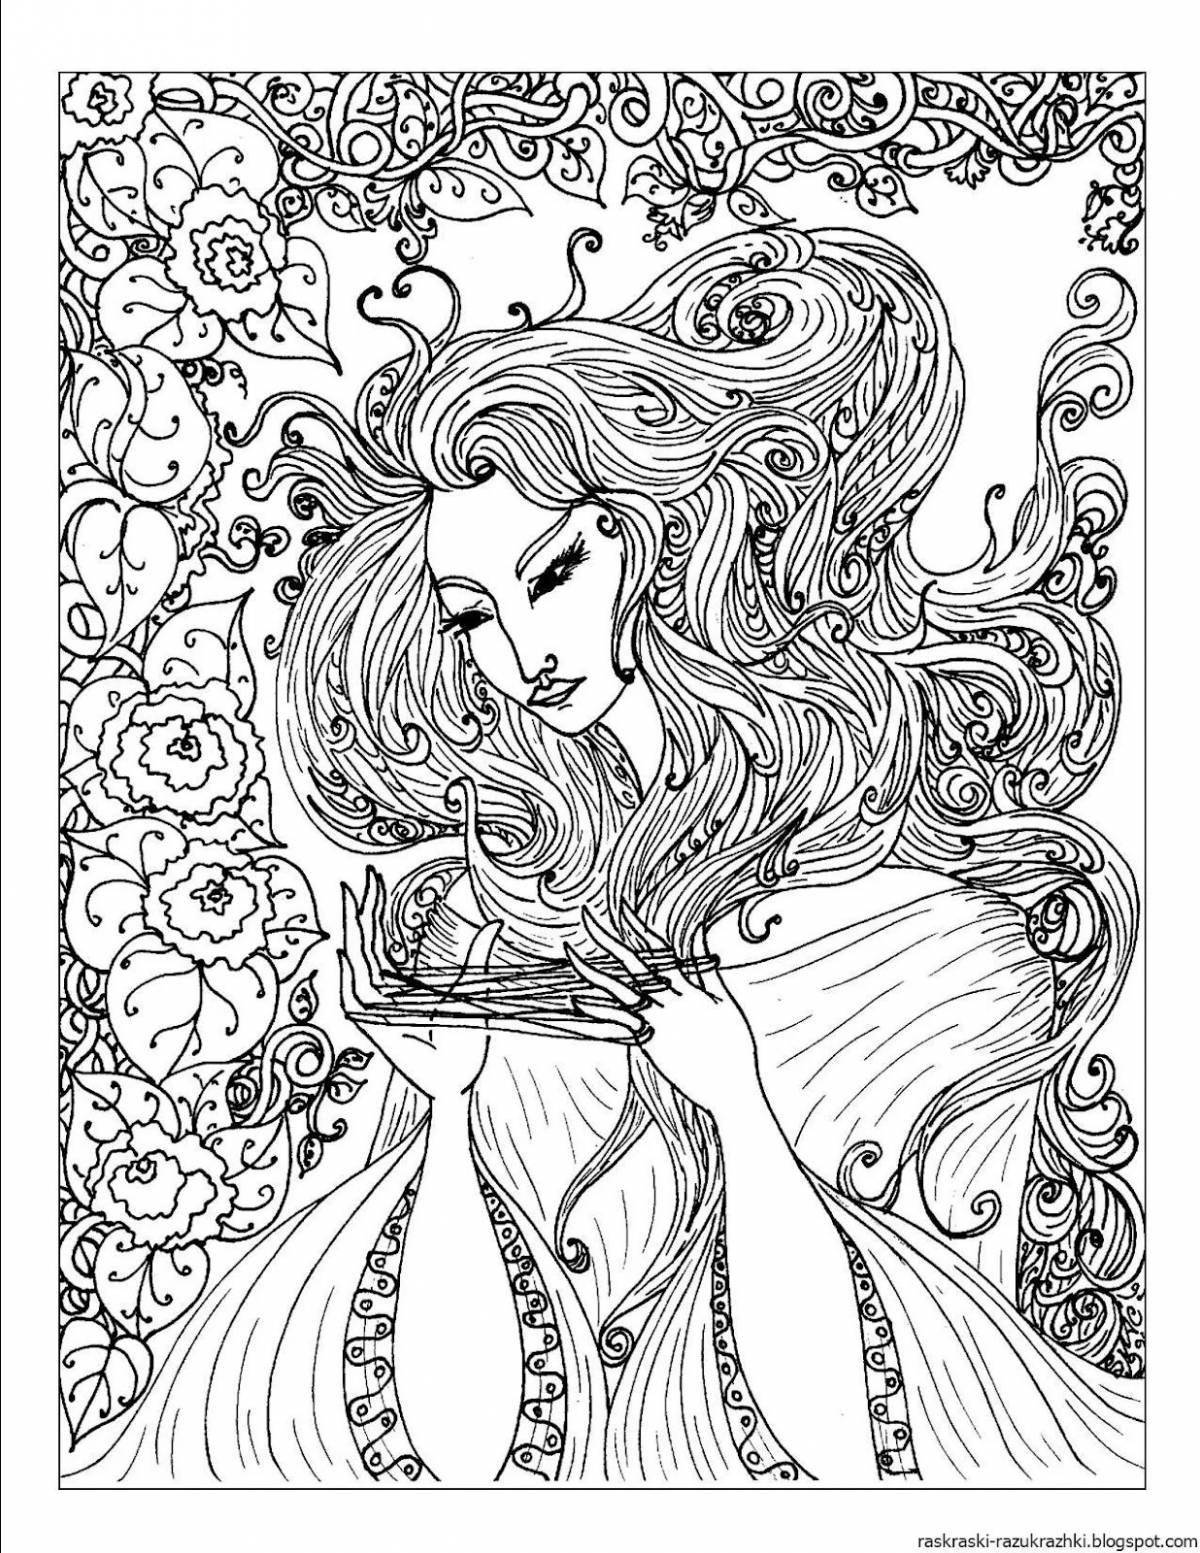 Great glamor girls coloring book